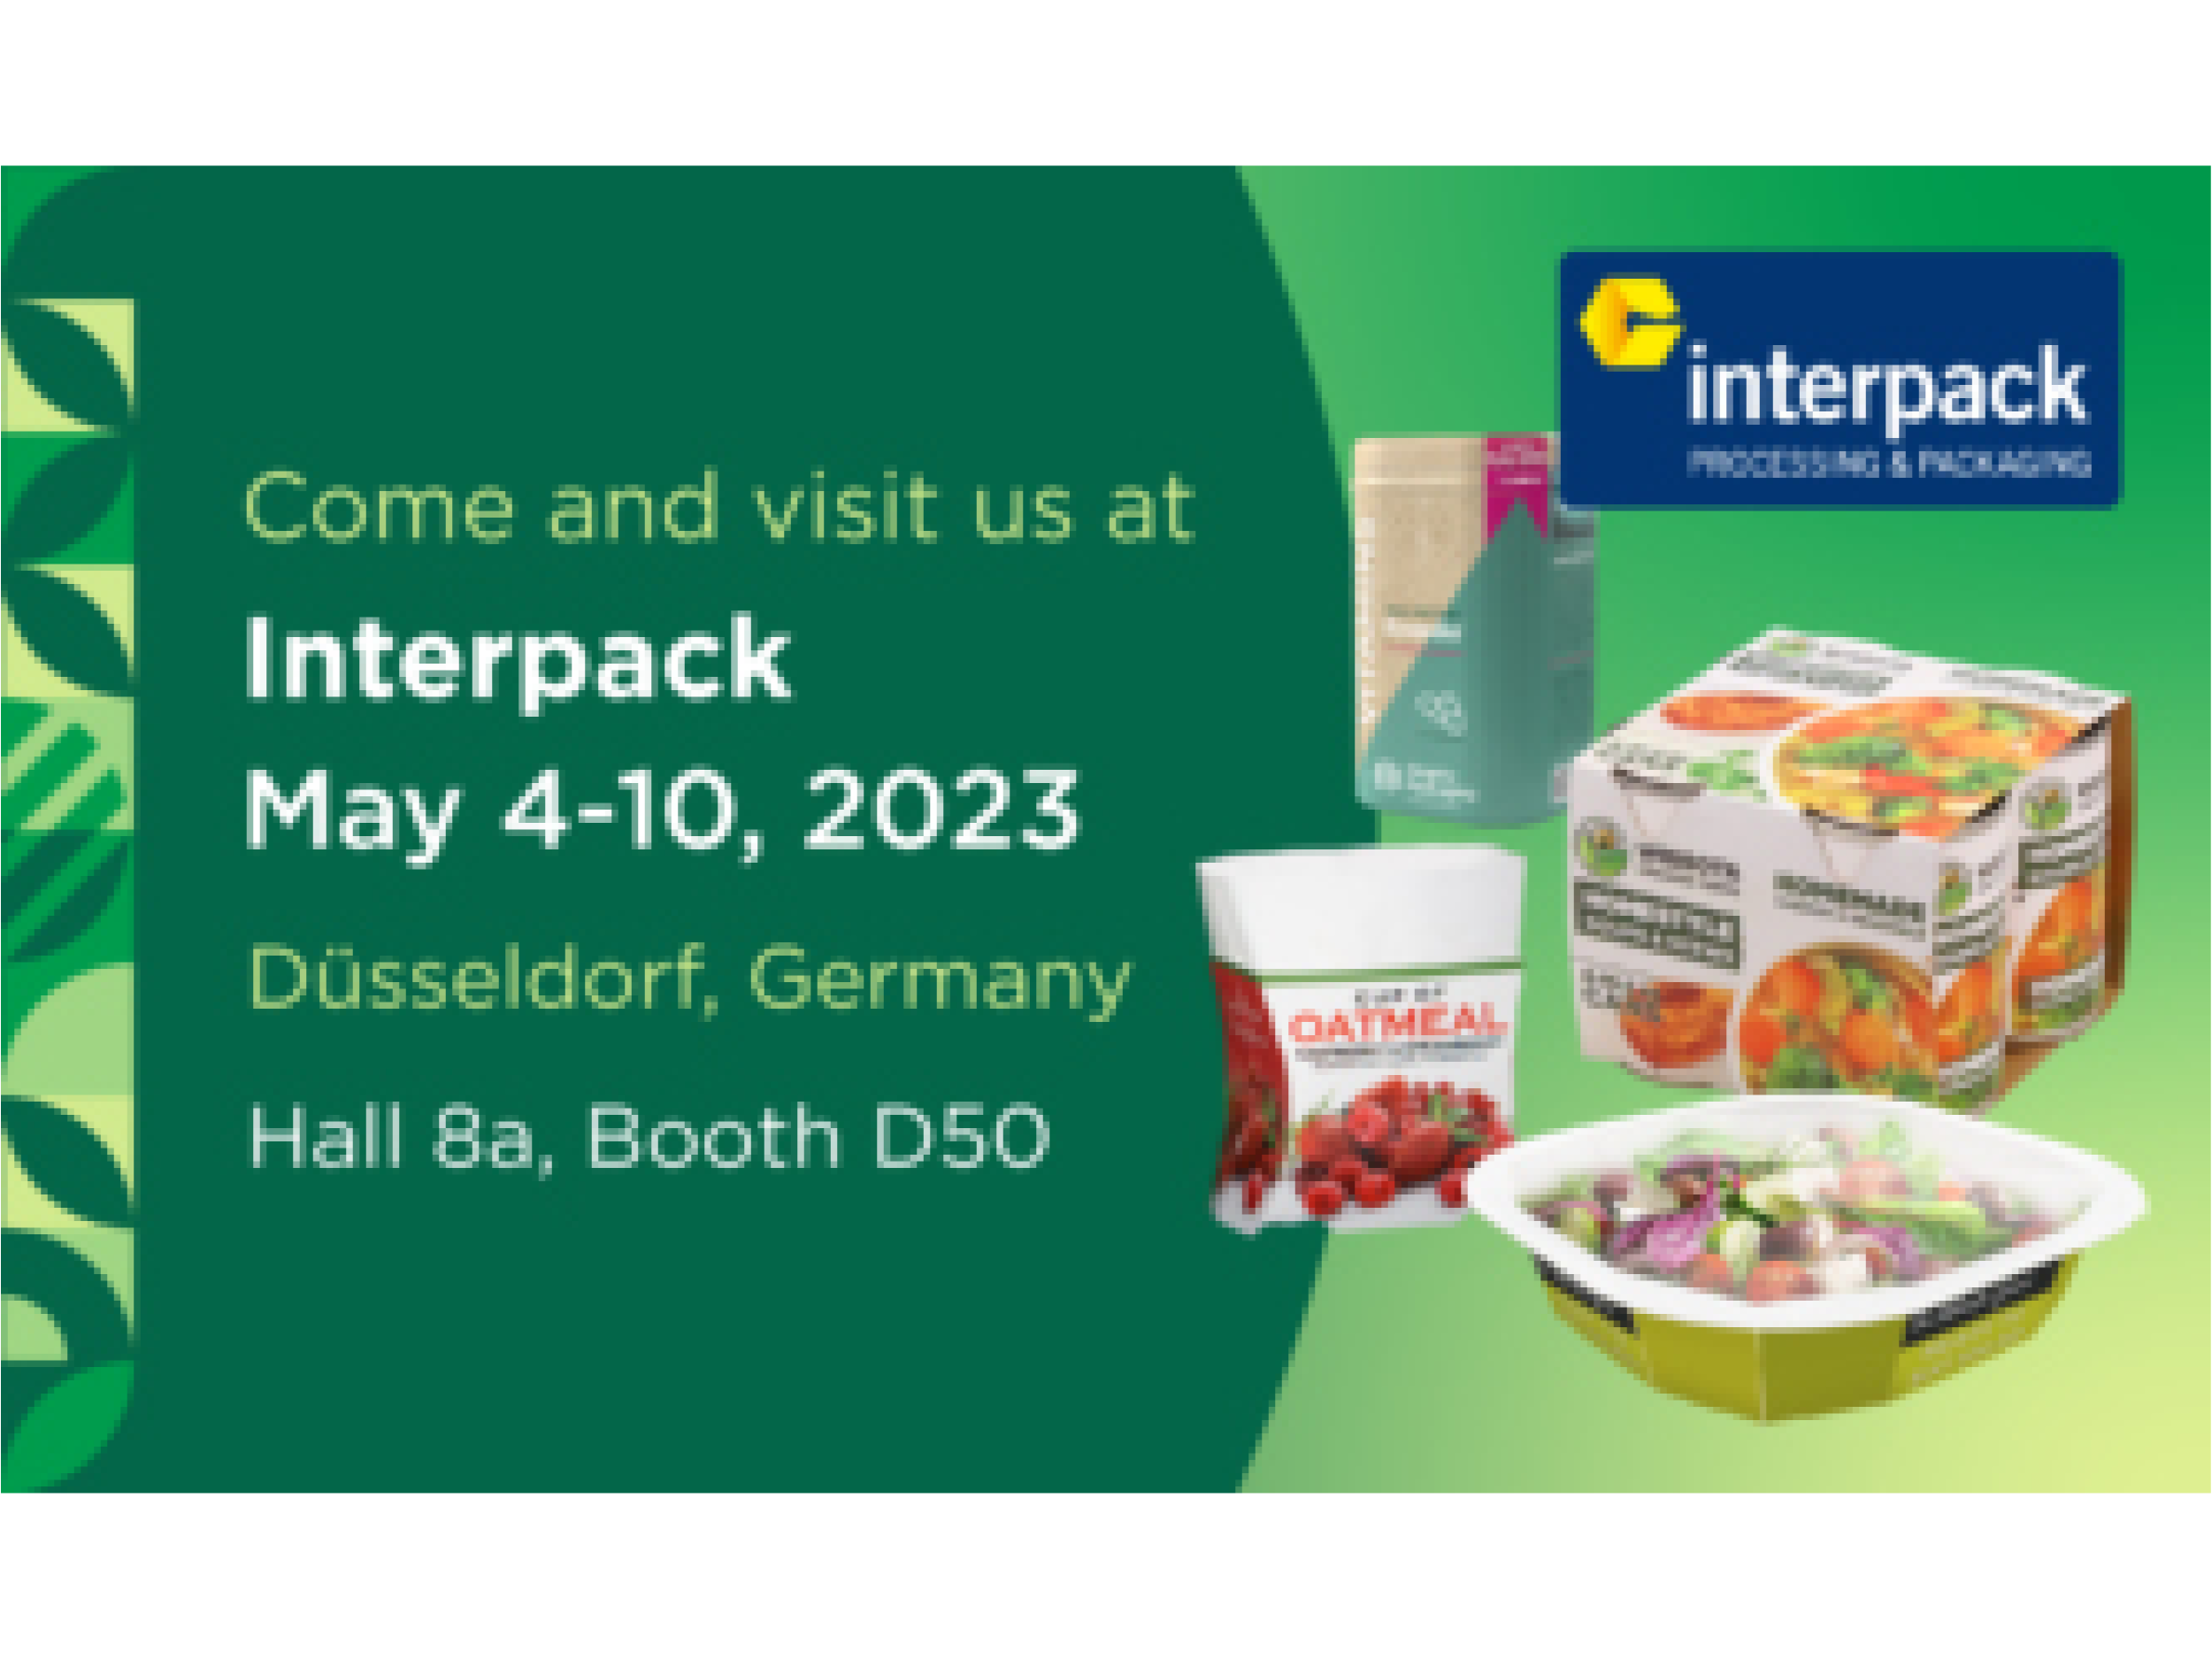 Request your free pass and join us at interpack 2023 in Düsseldorf, Germany to see our fiber-based, future-ready packaging.